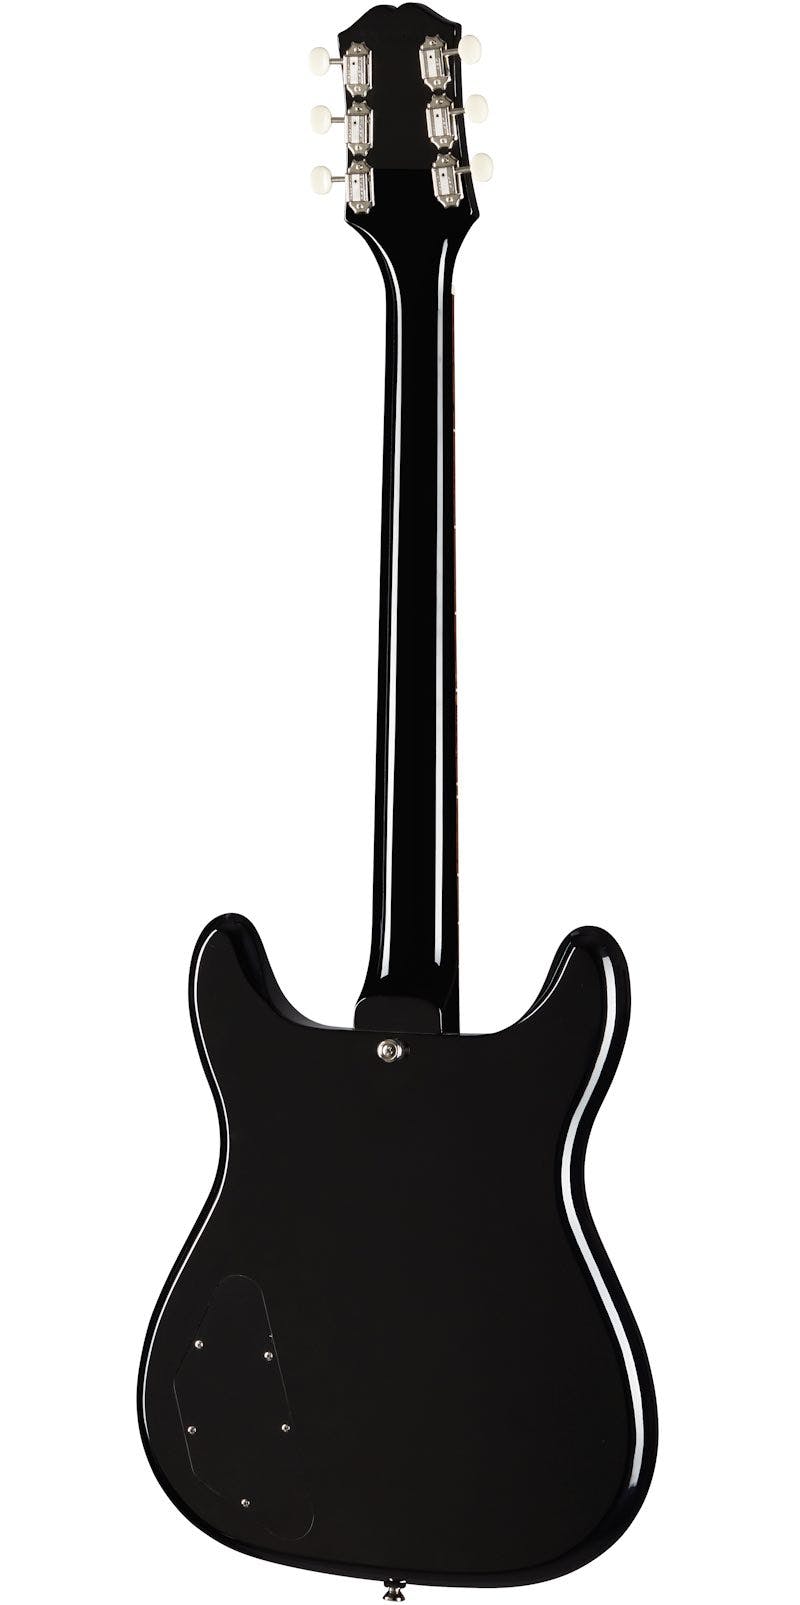 Epiphone Wilshire P-90 Electric Guitar in Ebony - Andertons Music Co.